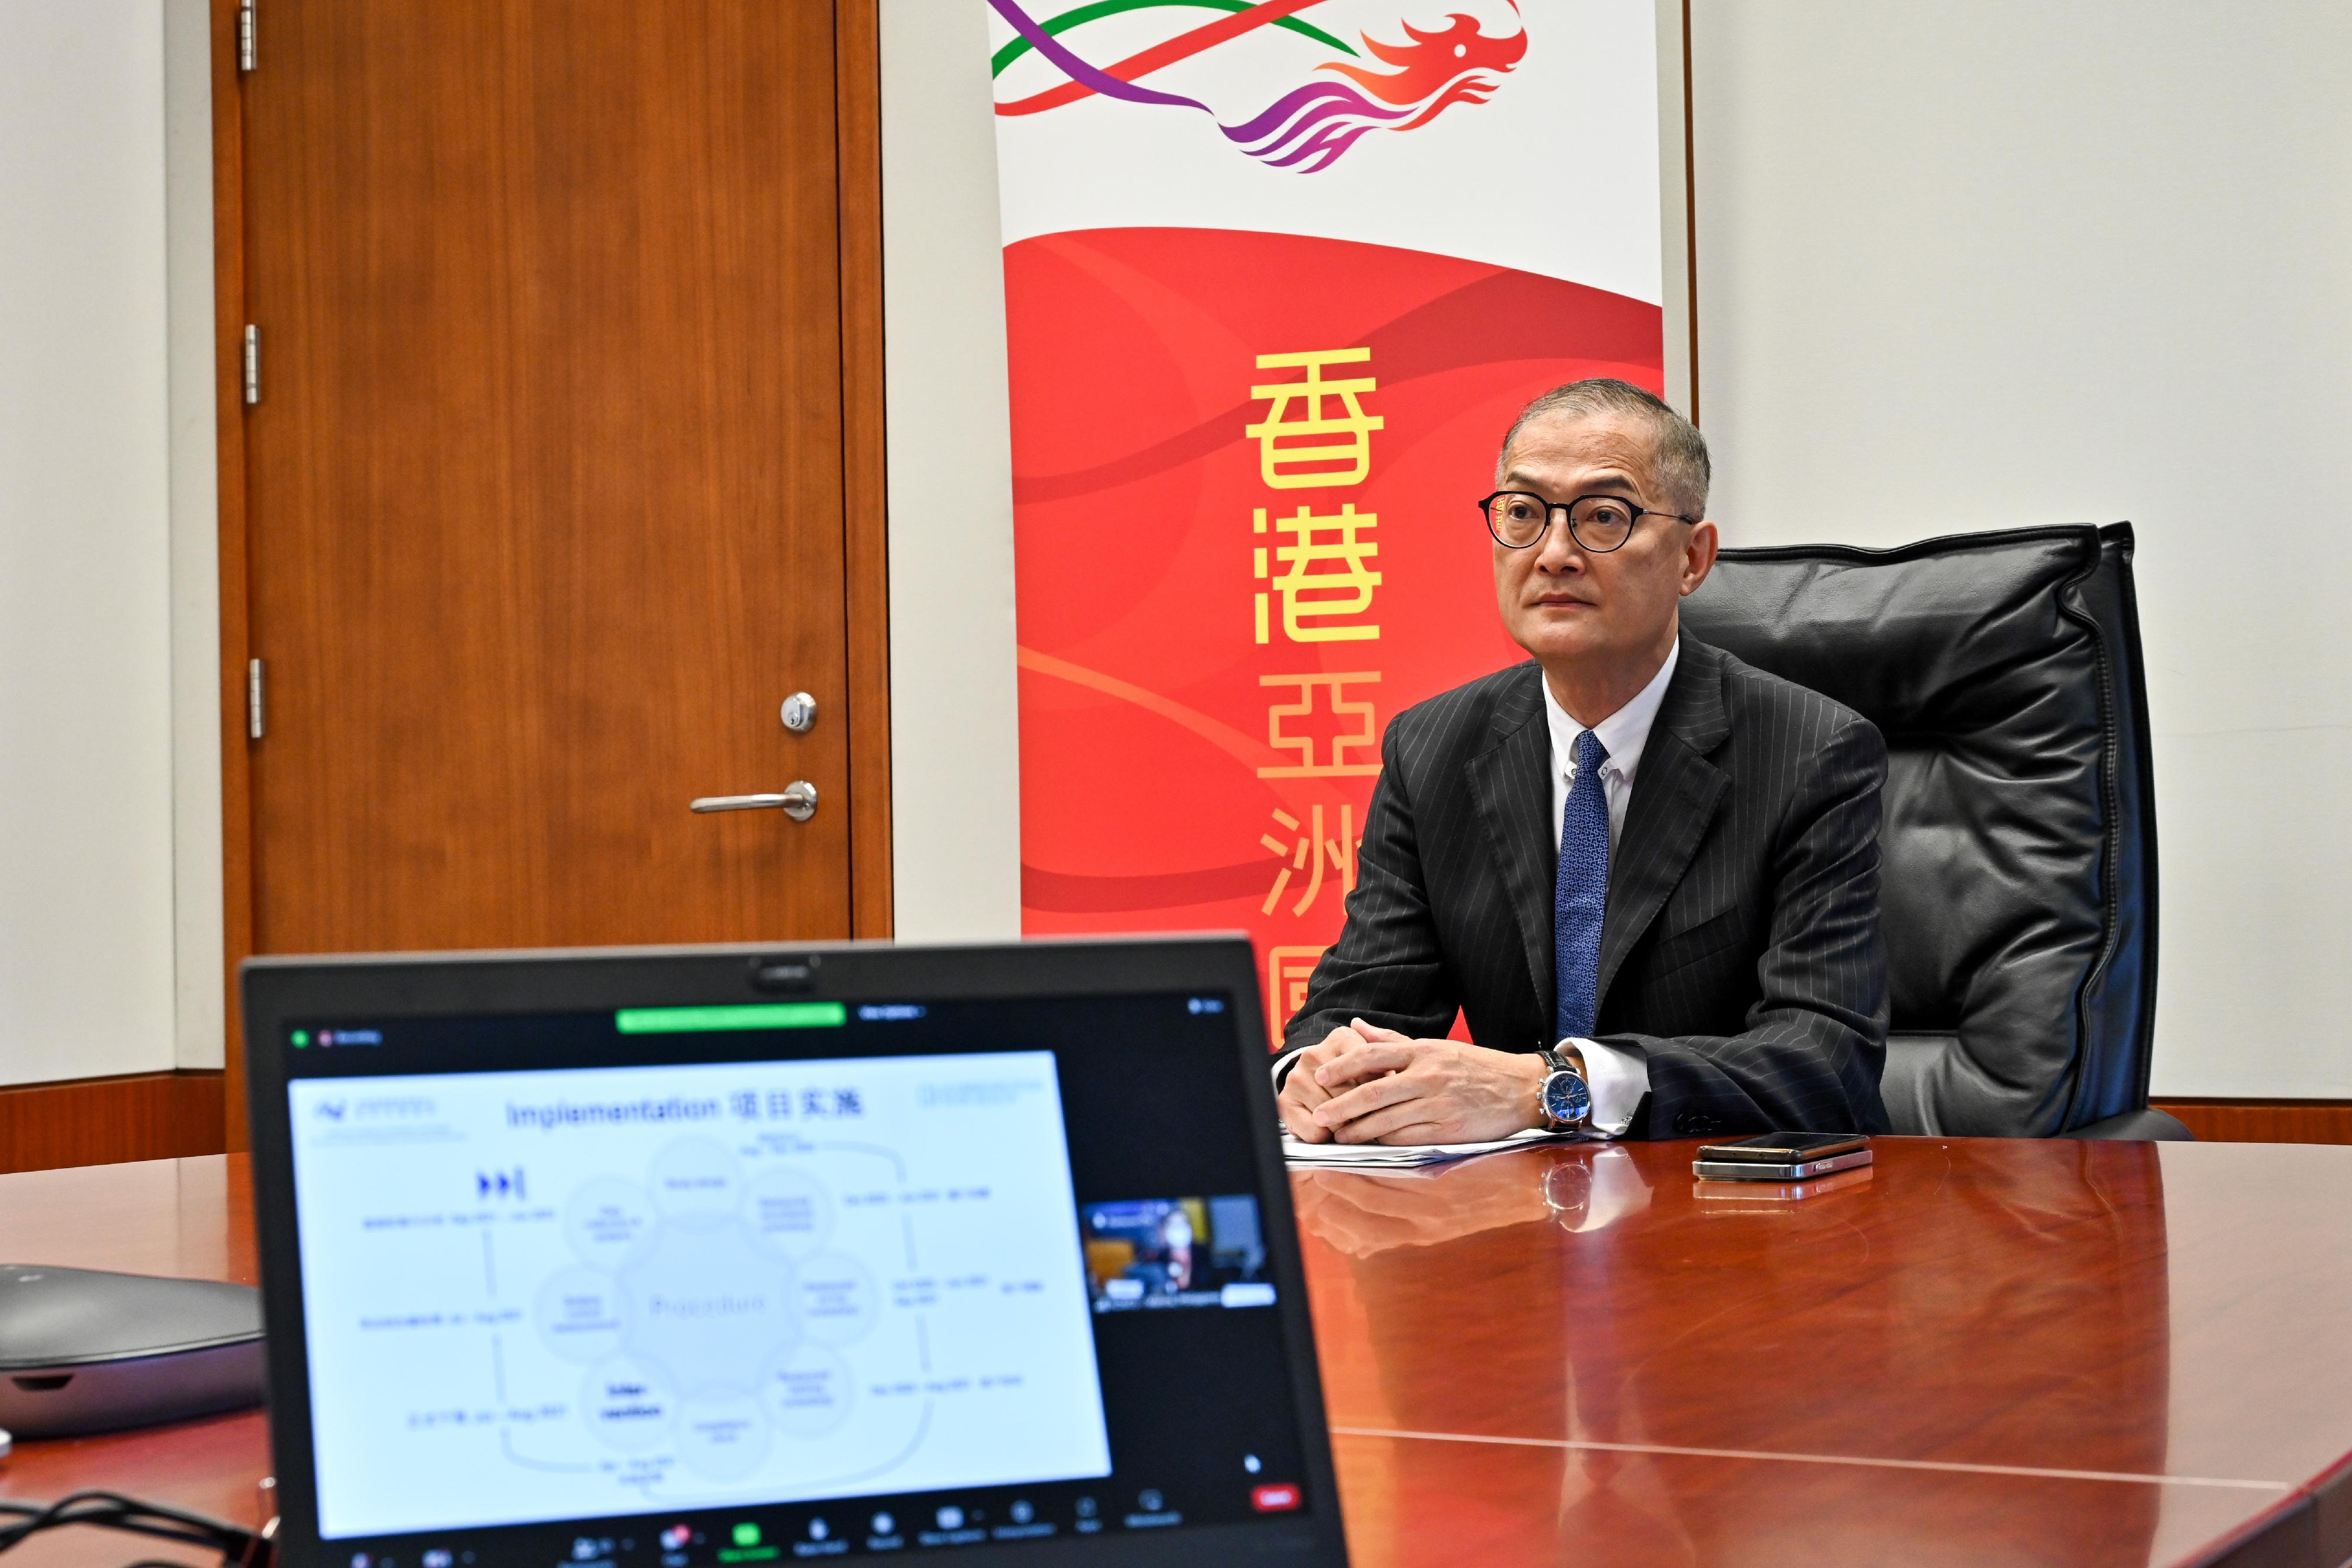 The Secretary for Health, Professor Lo Chung-mau, joined a panel discussion at the meeting of the 73rd session of the World Health Organization Regional Committee for the Western Pacific today (October 25) via video conferencing.